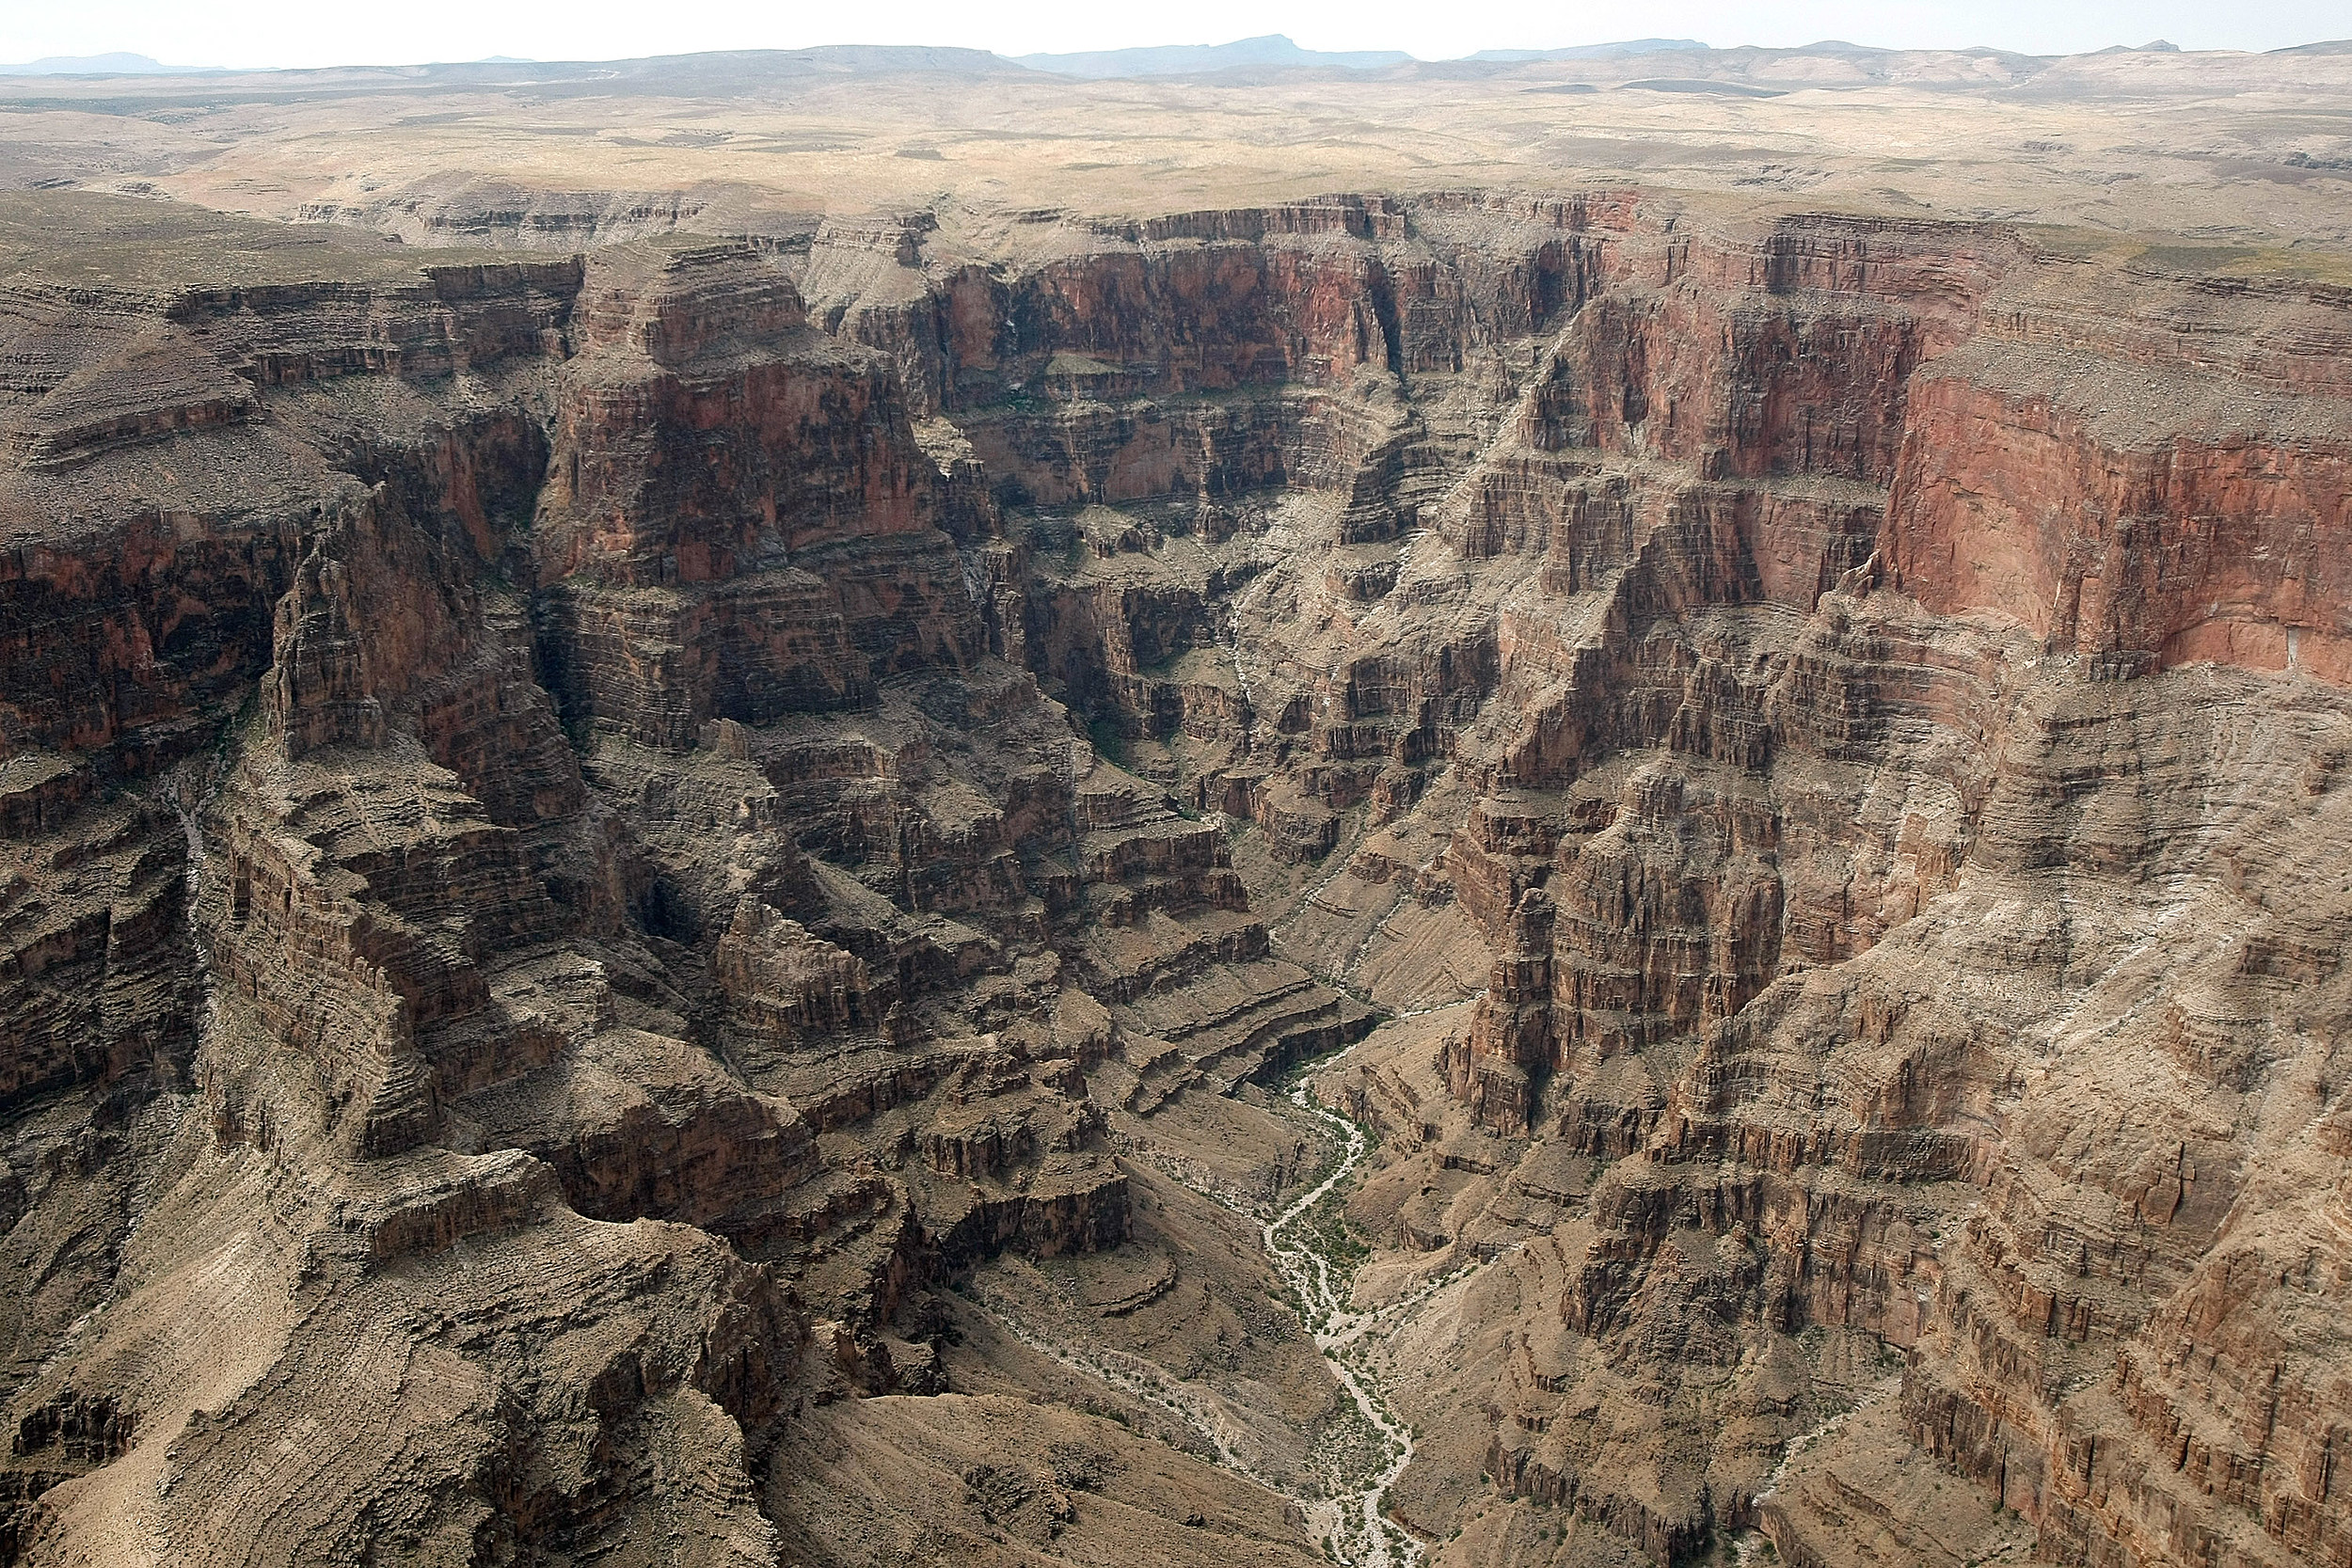 Nik Wallenda's “Grand Canyon” Tightrope Walk Not Exactly What It Seemed